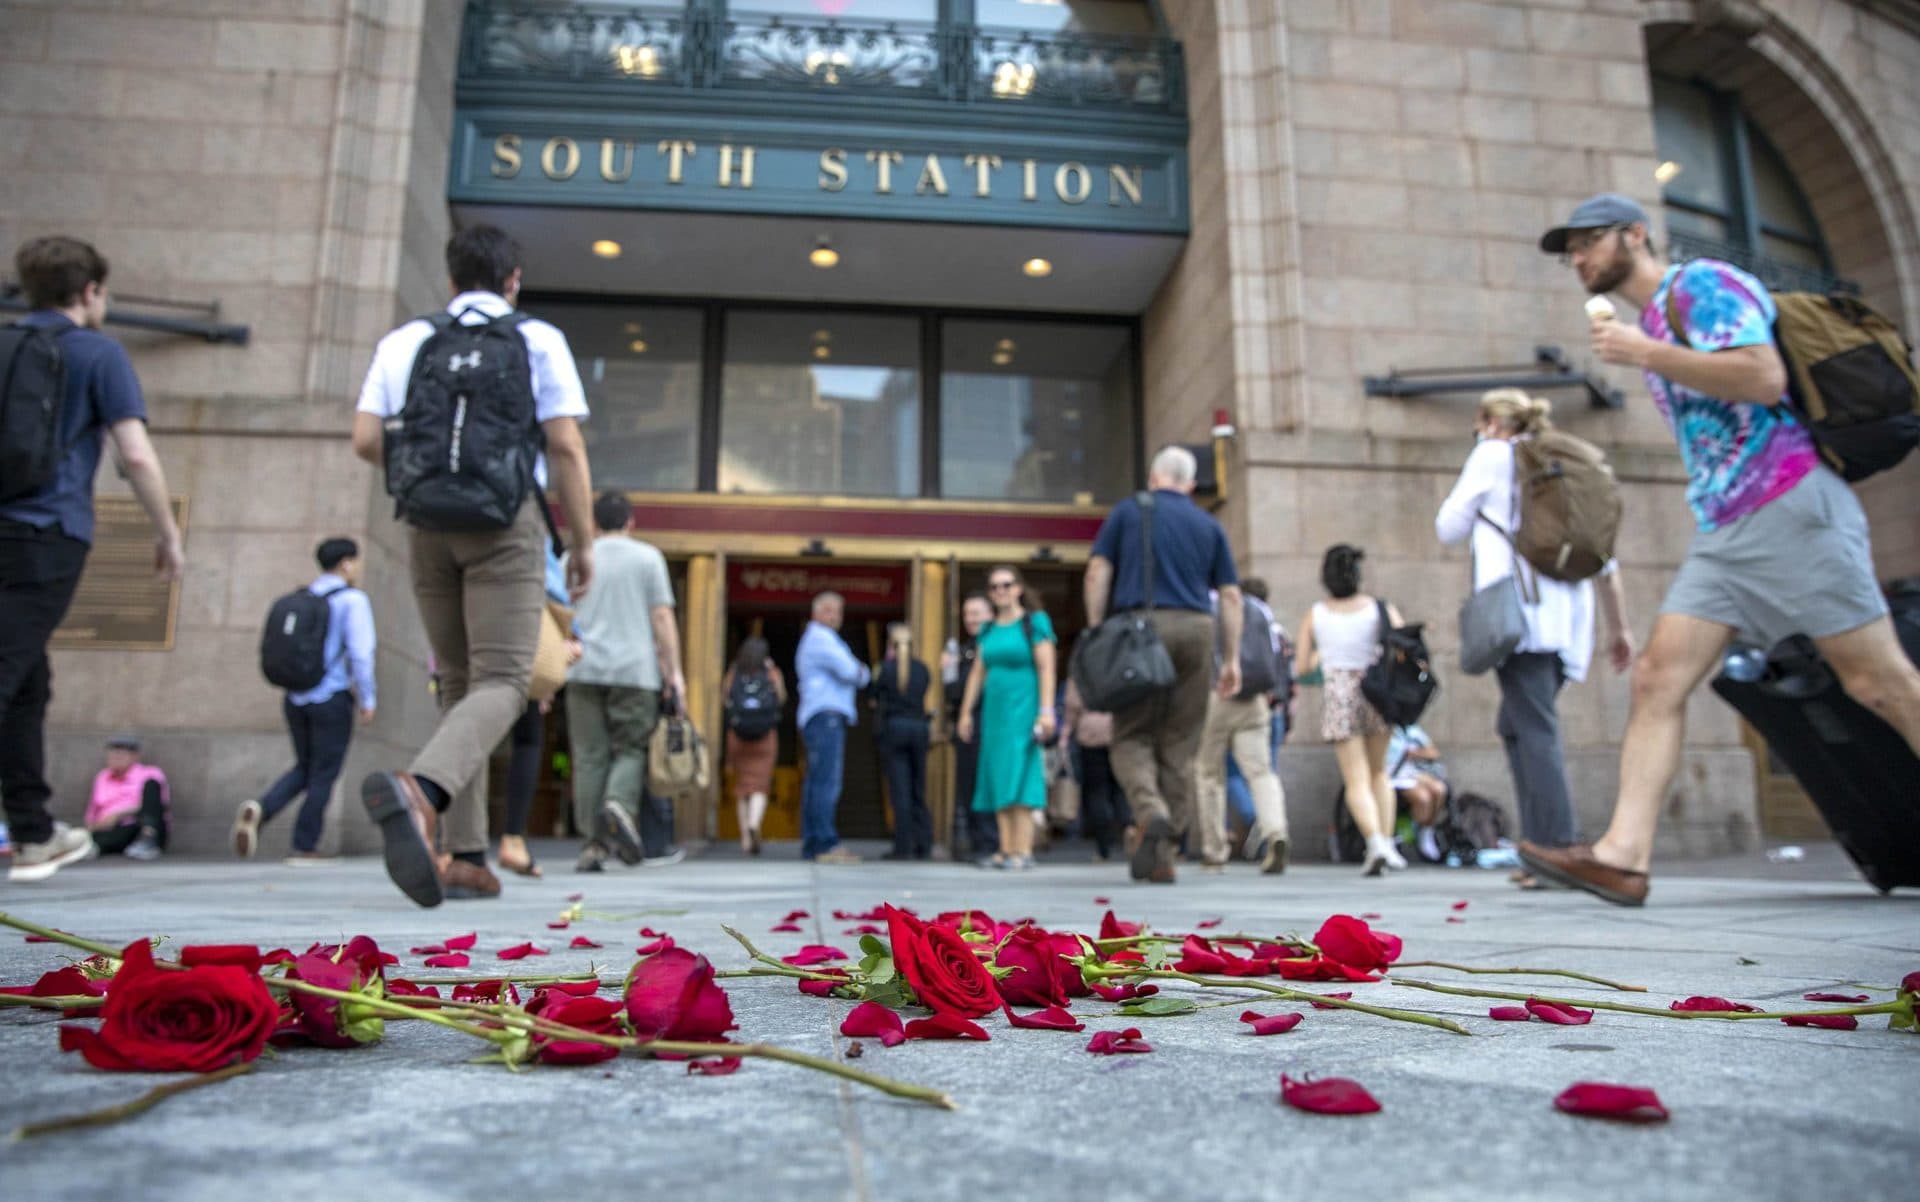 Commuters hurry past red roses scattered on the sidewalk at the entrance to South Station after a performance of artist Anne-Katrin Spiess' &quot;Death by Plastic.&quot; (Robin Lubbock/WBUR)